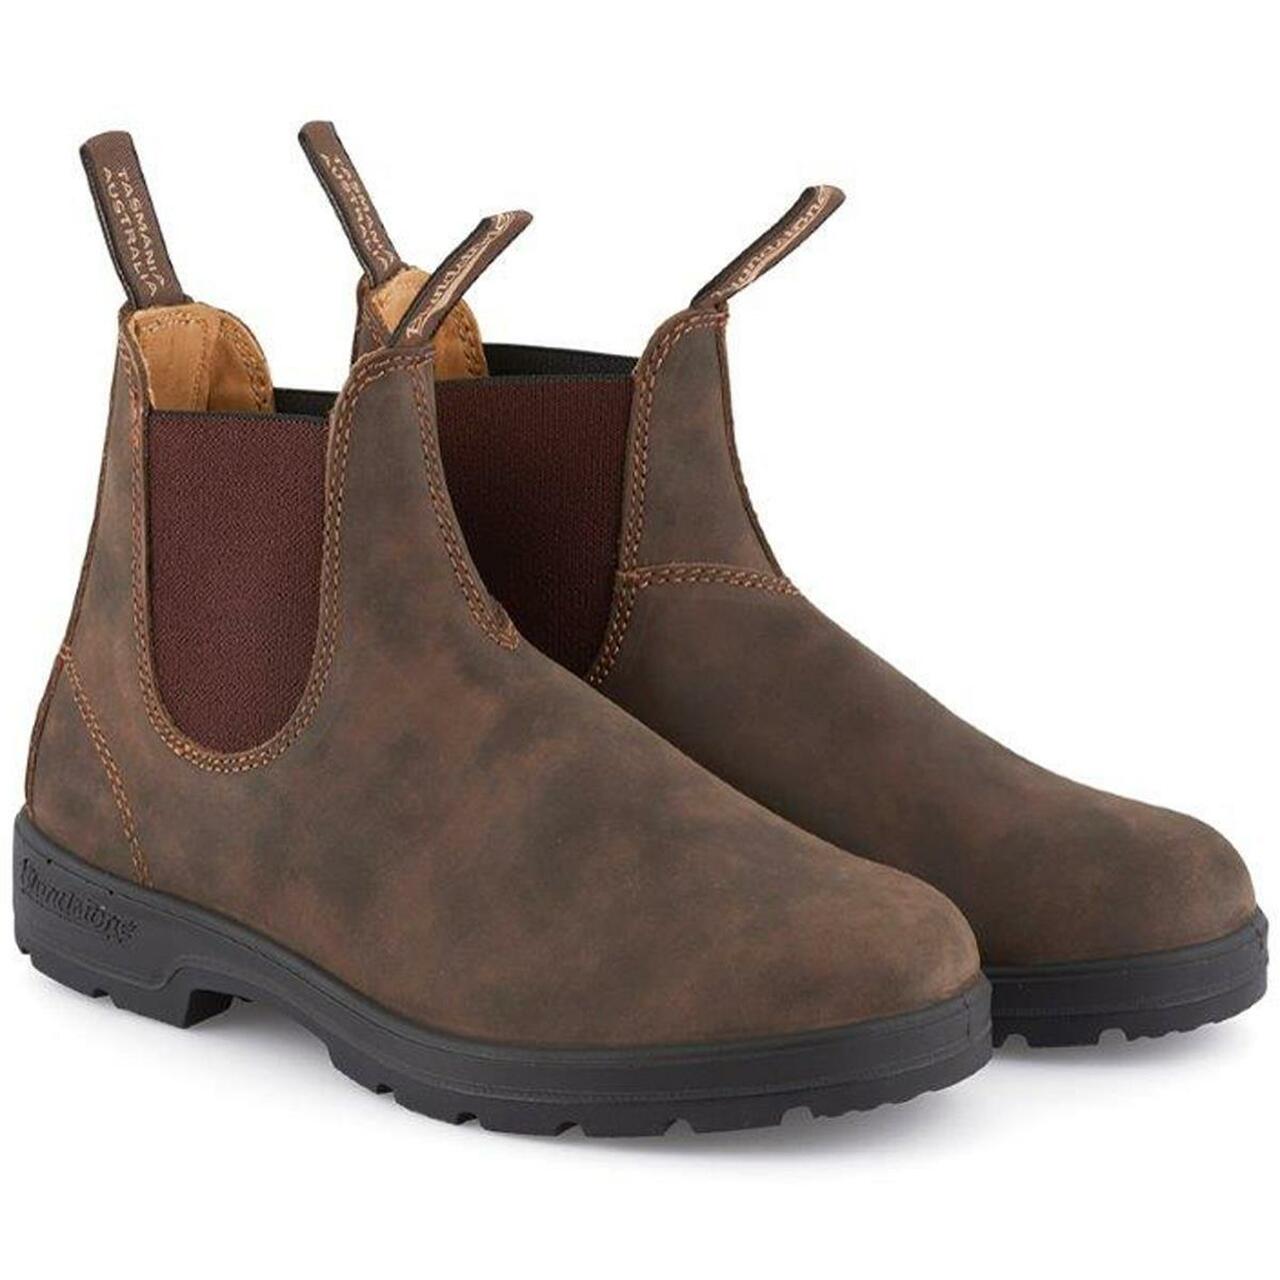 Blundstone 585 Classic Chelsea Boots - Rustic Brown